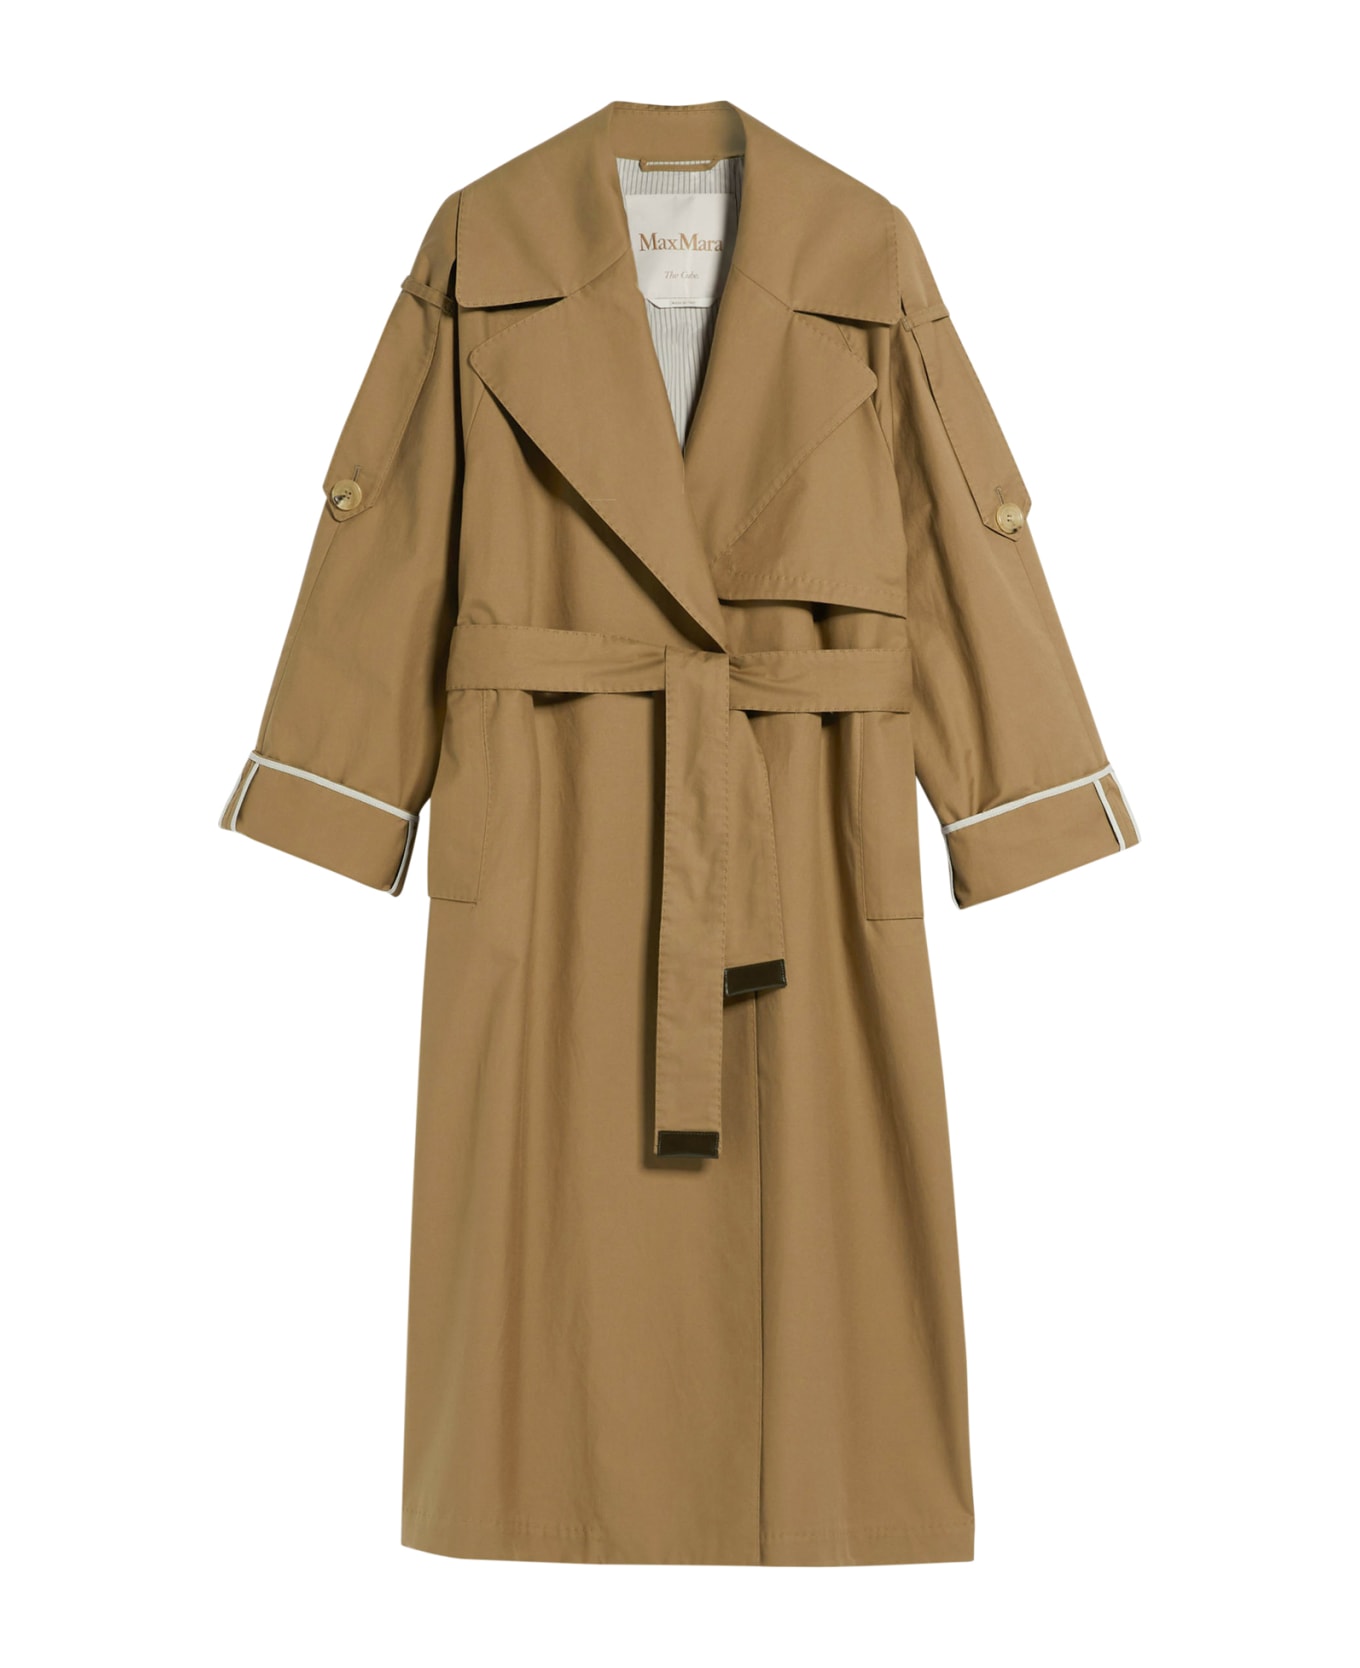 Max Mara The Cube Utrench Trench - Caramel コート